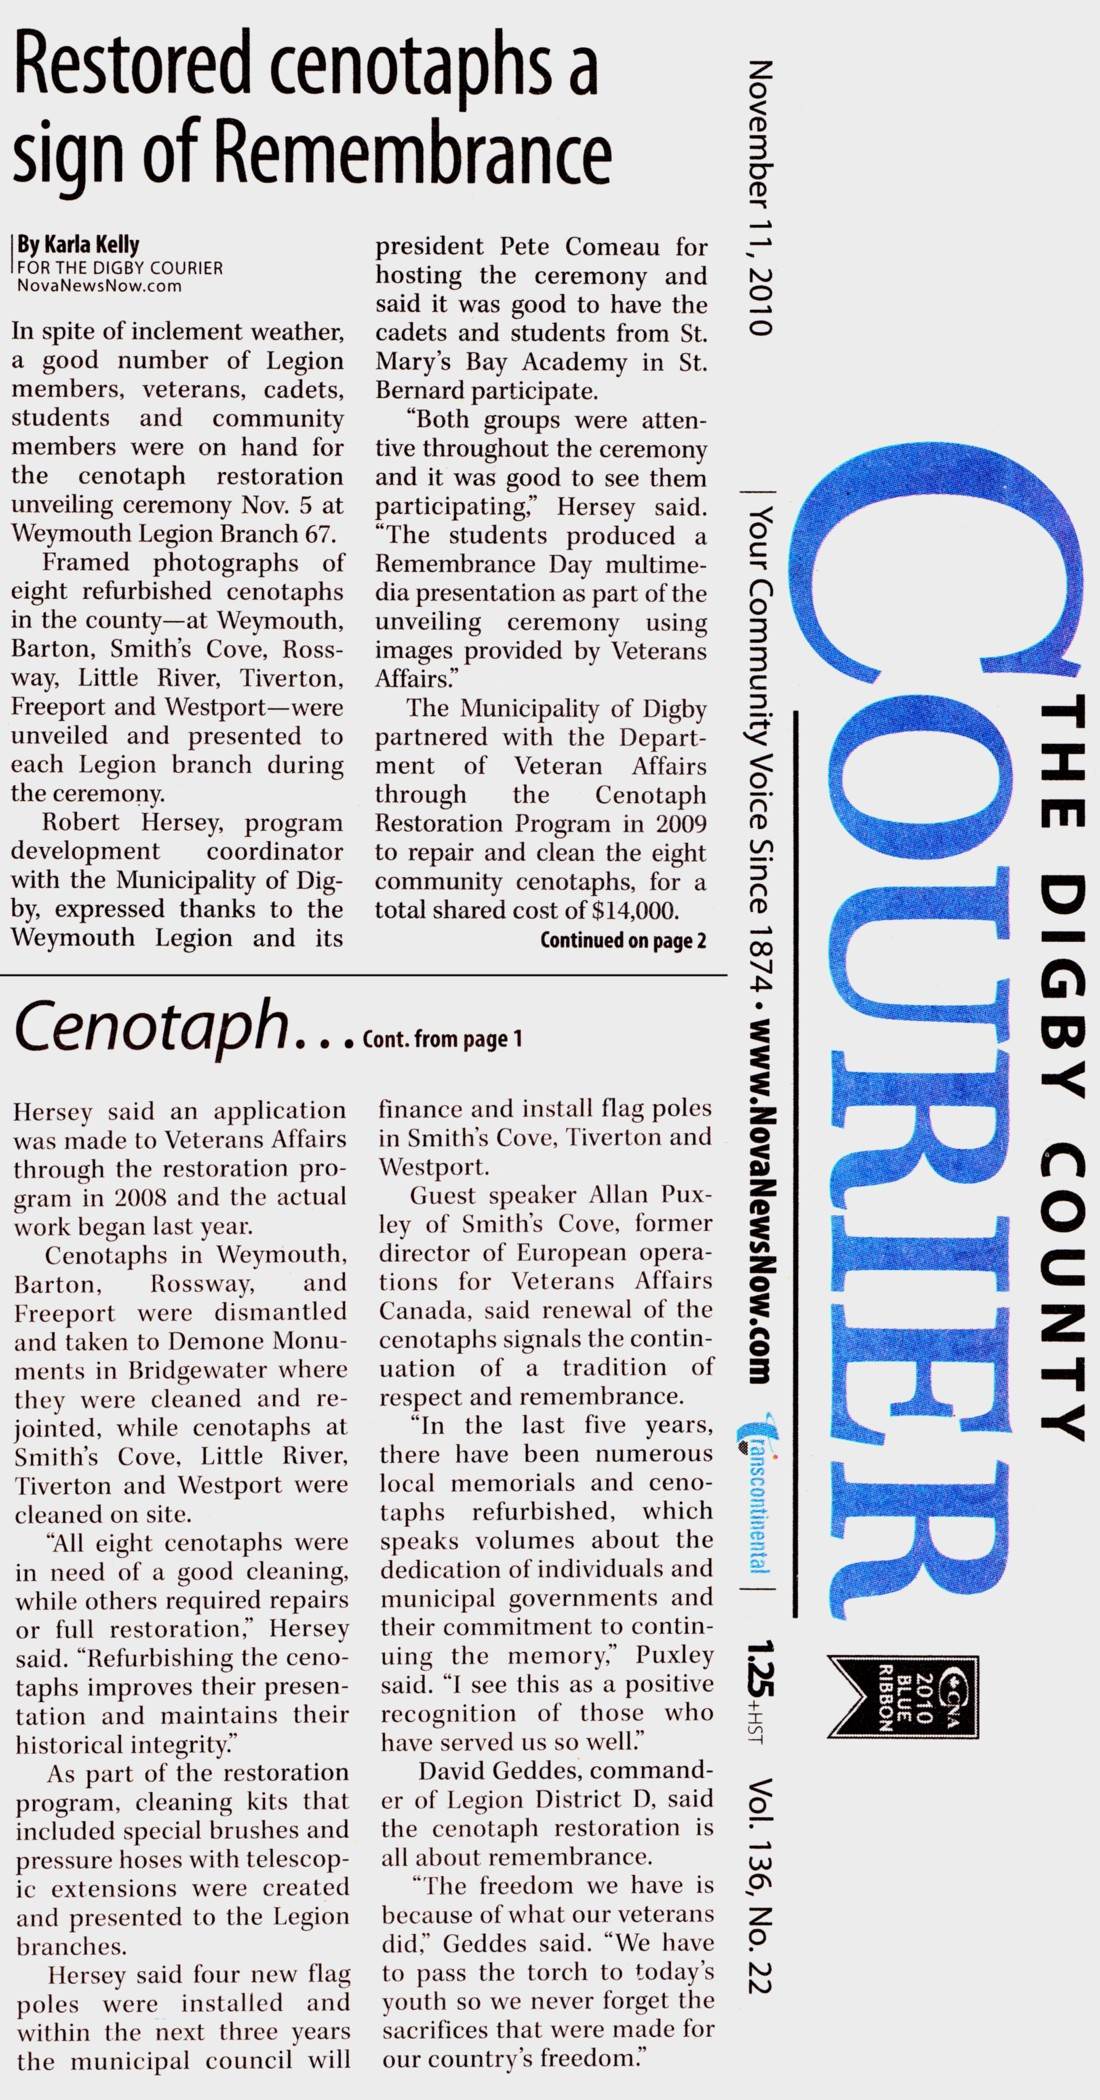 Clipping: Restored Cenotaphs a sign of Remembrance, The Digby County Courier, 11 Nov 2010